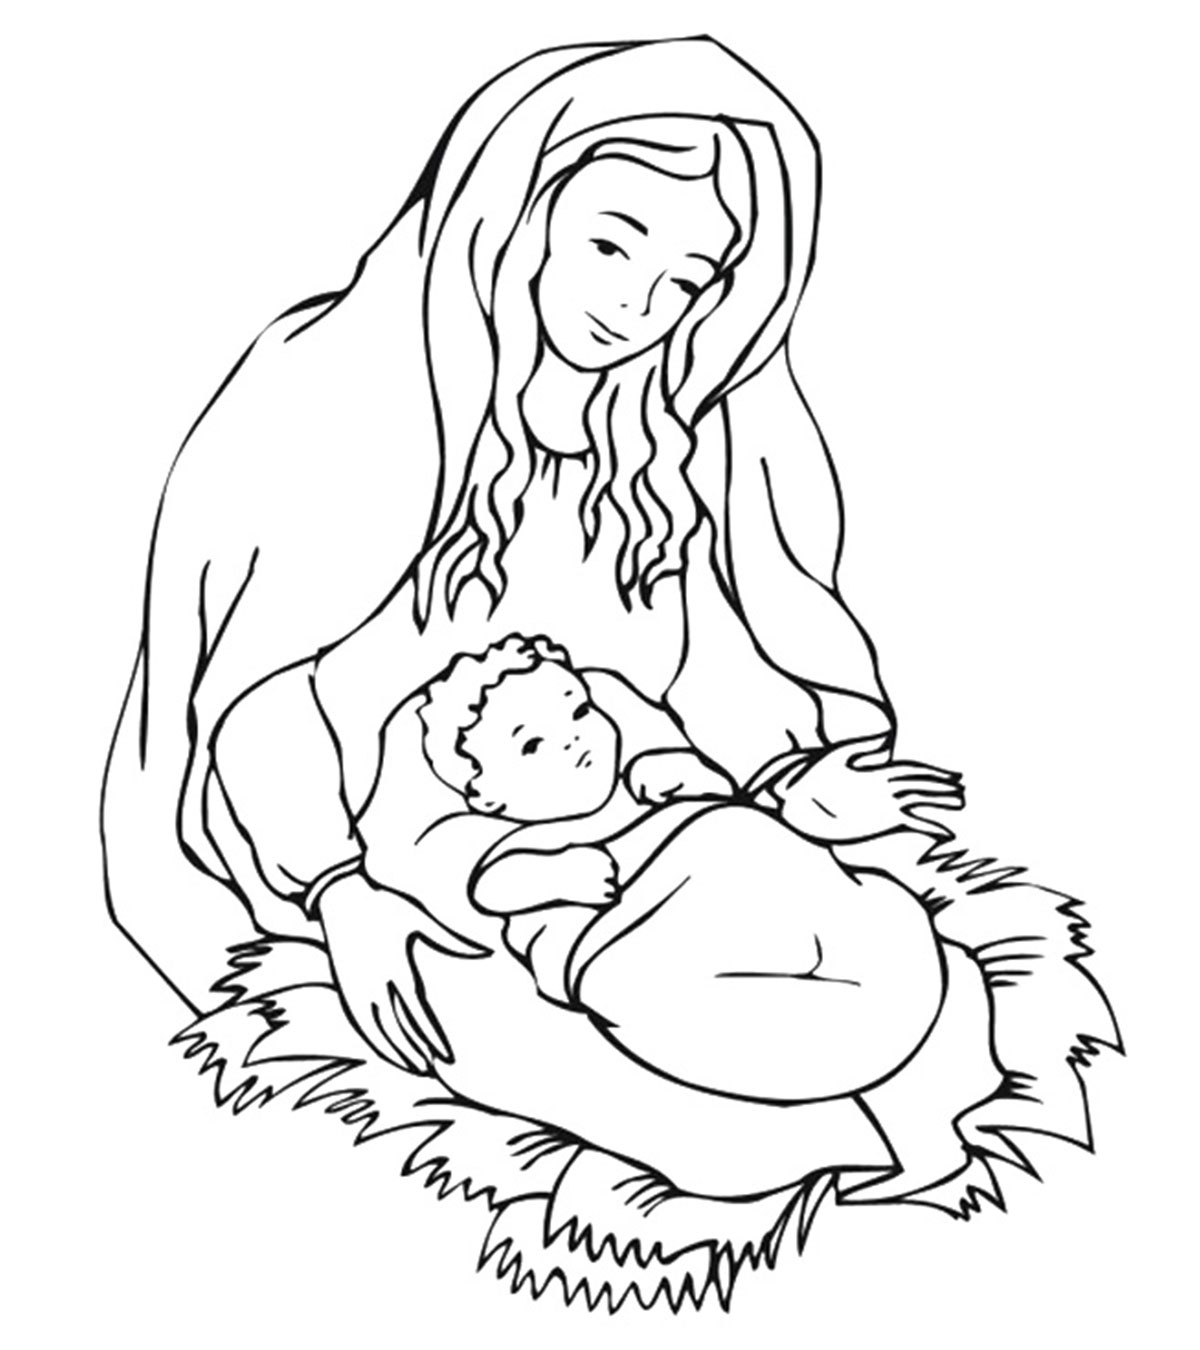 Top 25 Free Printable Christmas Coloring Pages Online